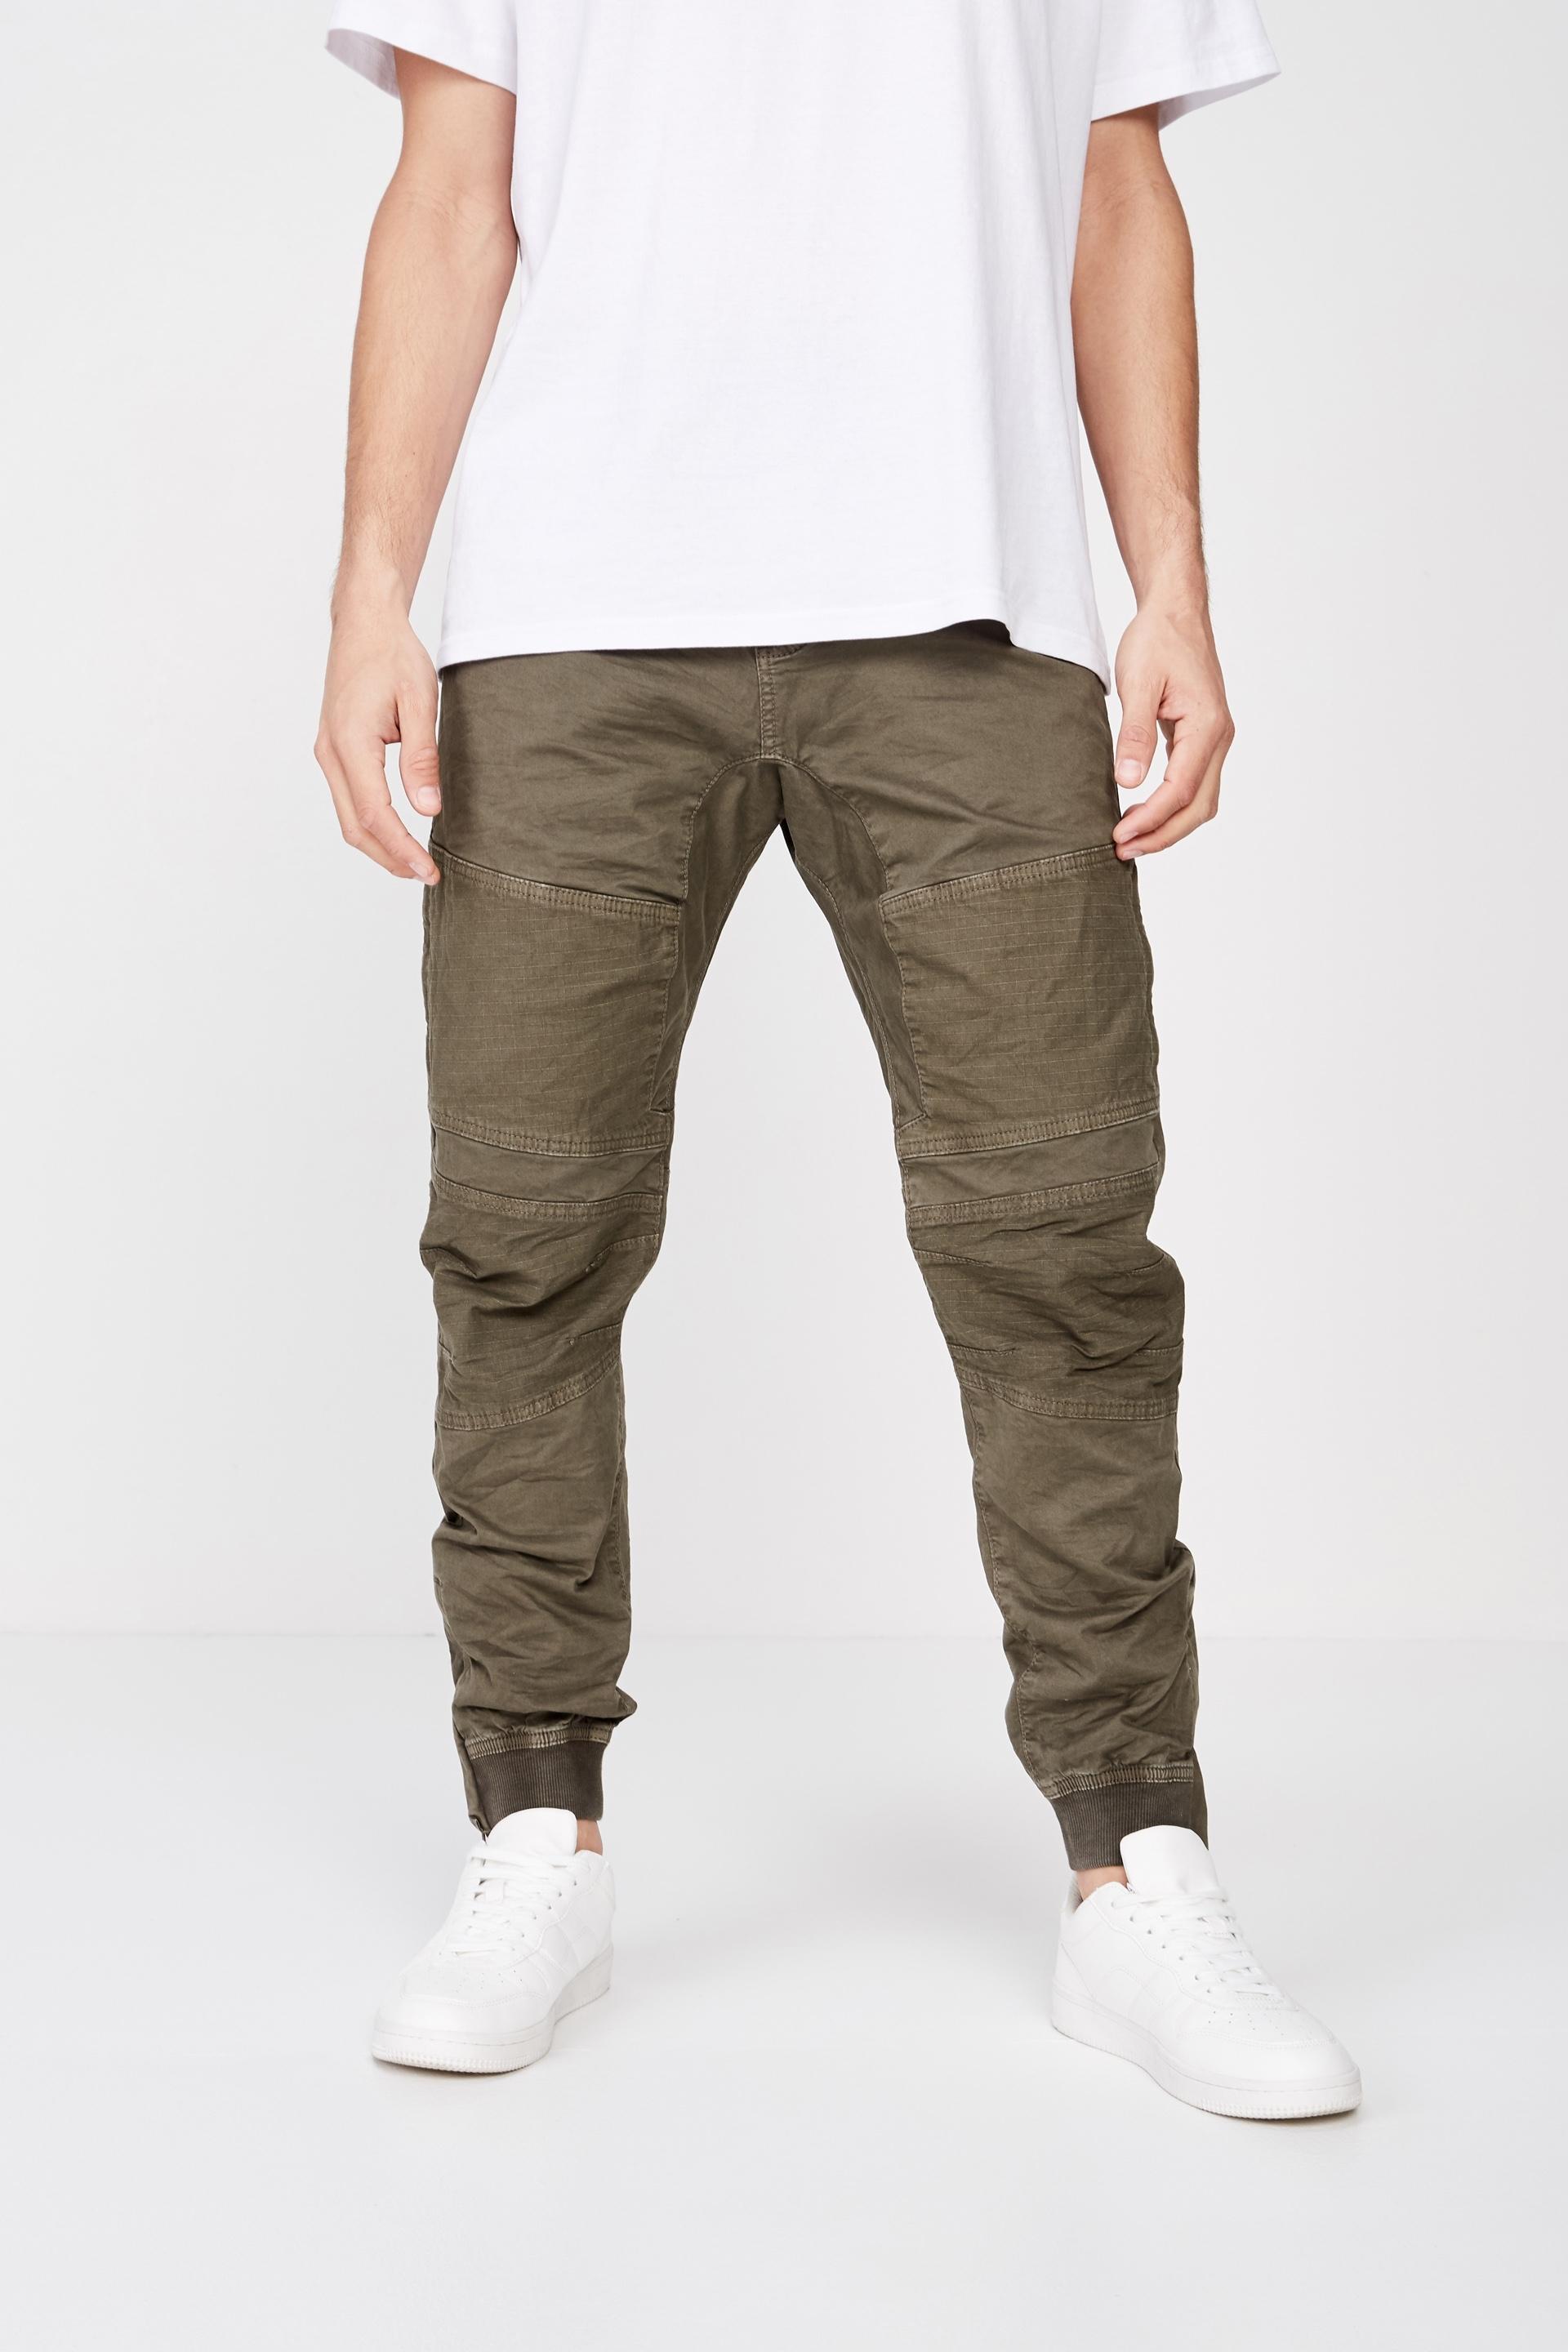 Urban jogger - olive ripstop utility Cotton On Pants & Chinos ...